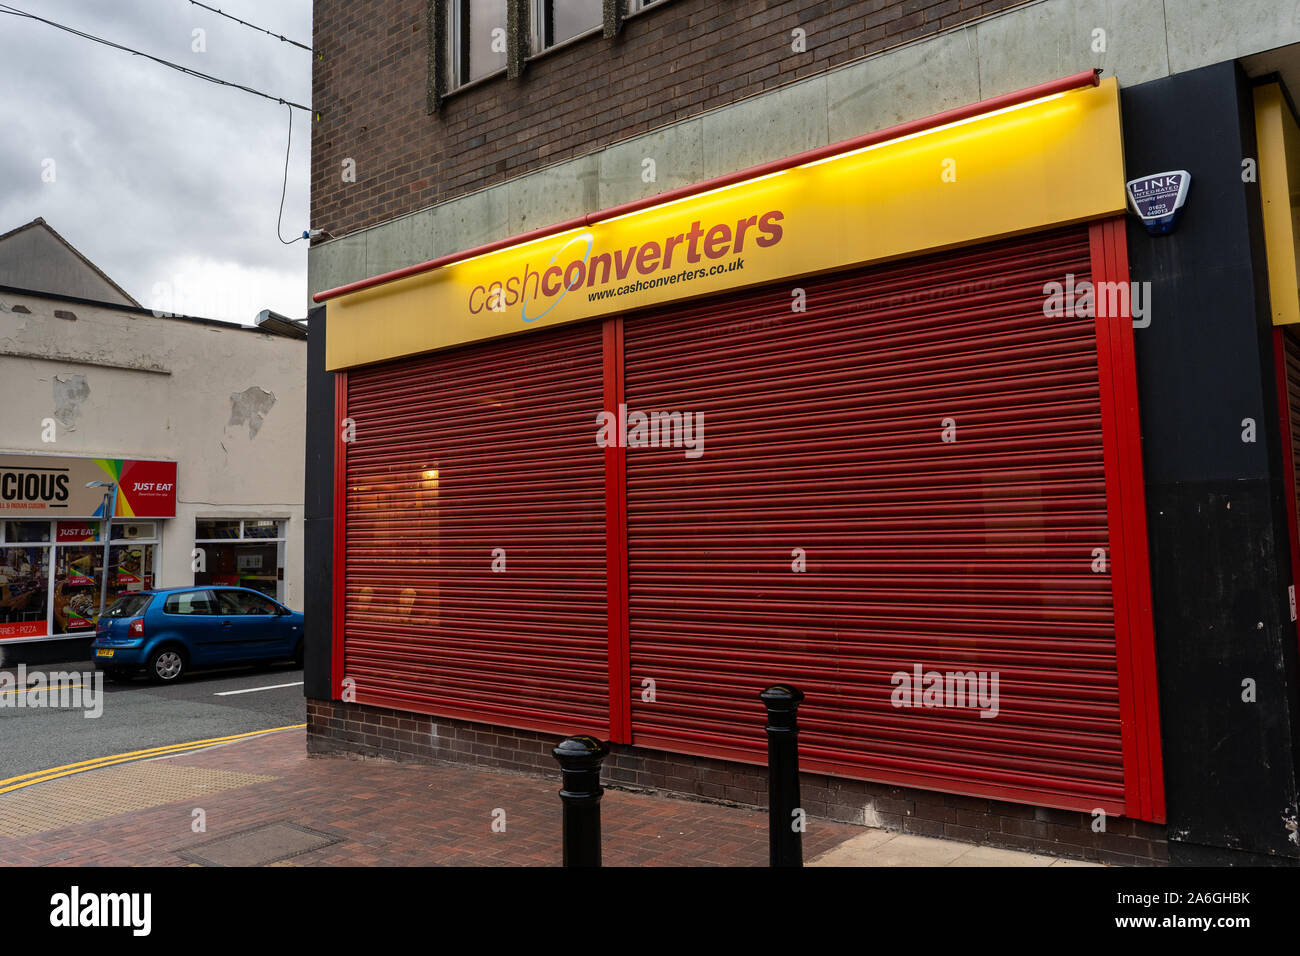 A very well secured and locked up Cash Converters shop, store in the Newcastle under Lyme, security facade Stock Photo